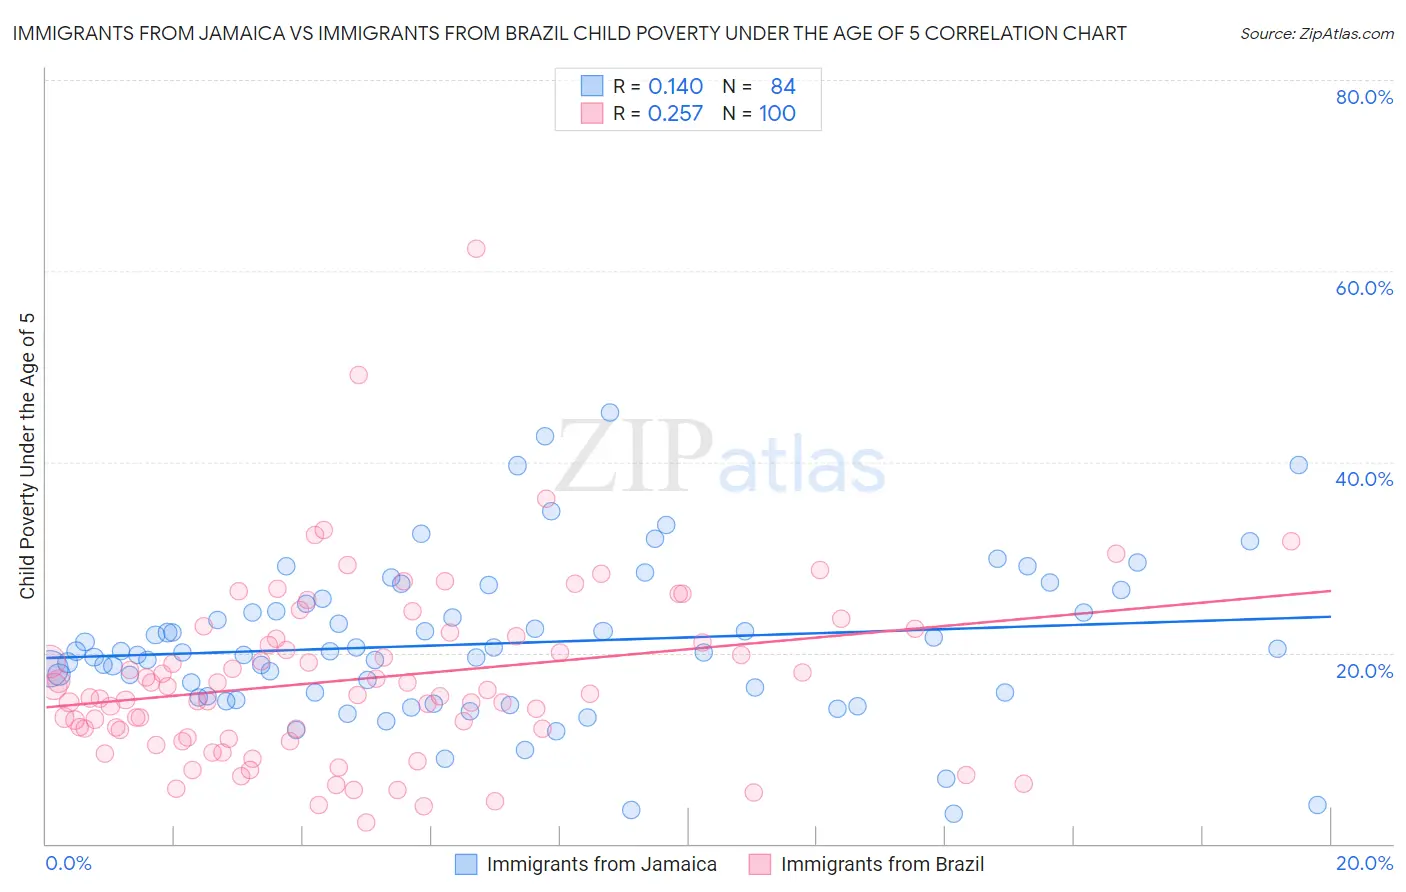 Immigrants from Jamaica vs Immigrants from Brazil Child Poverty Under the Age of 5